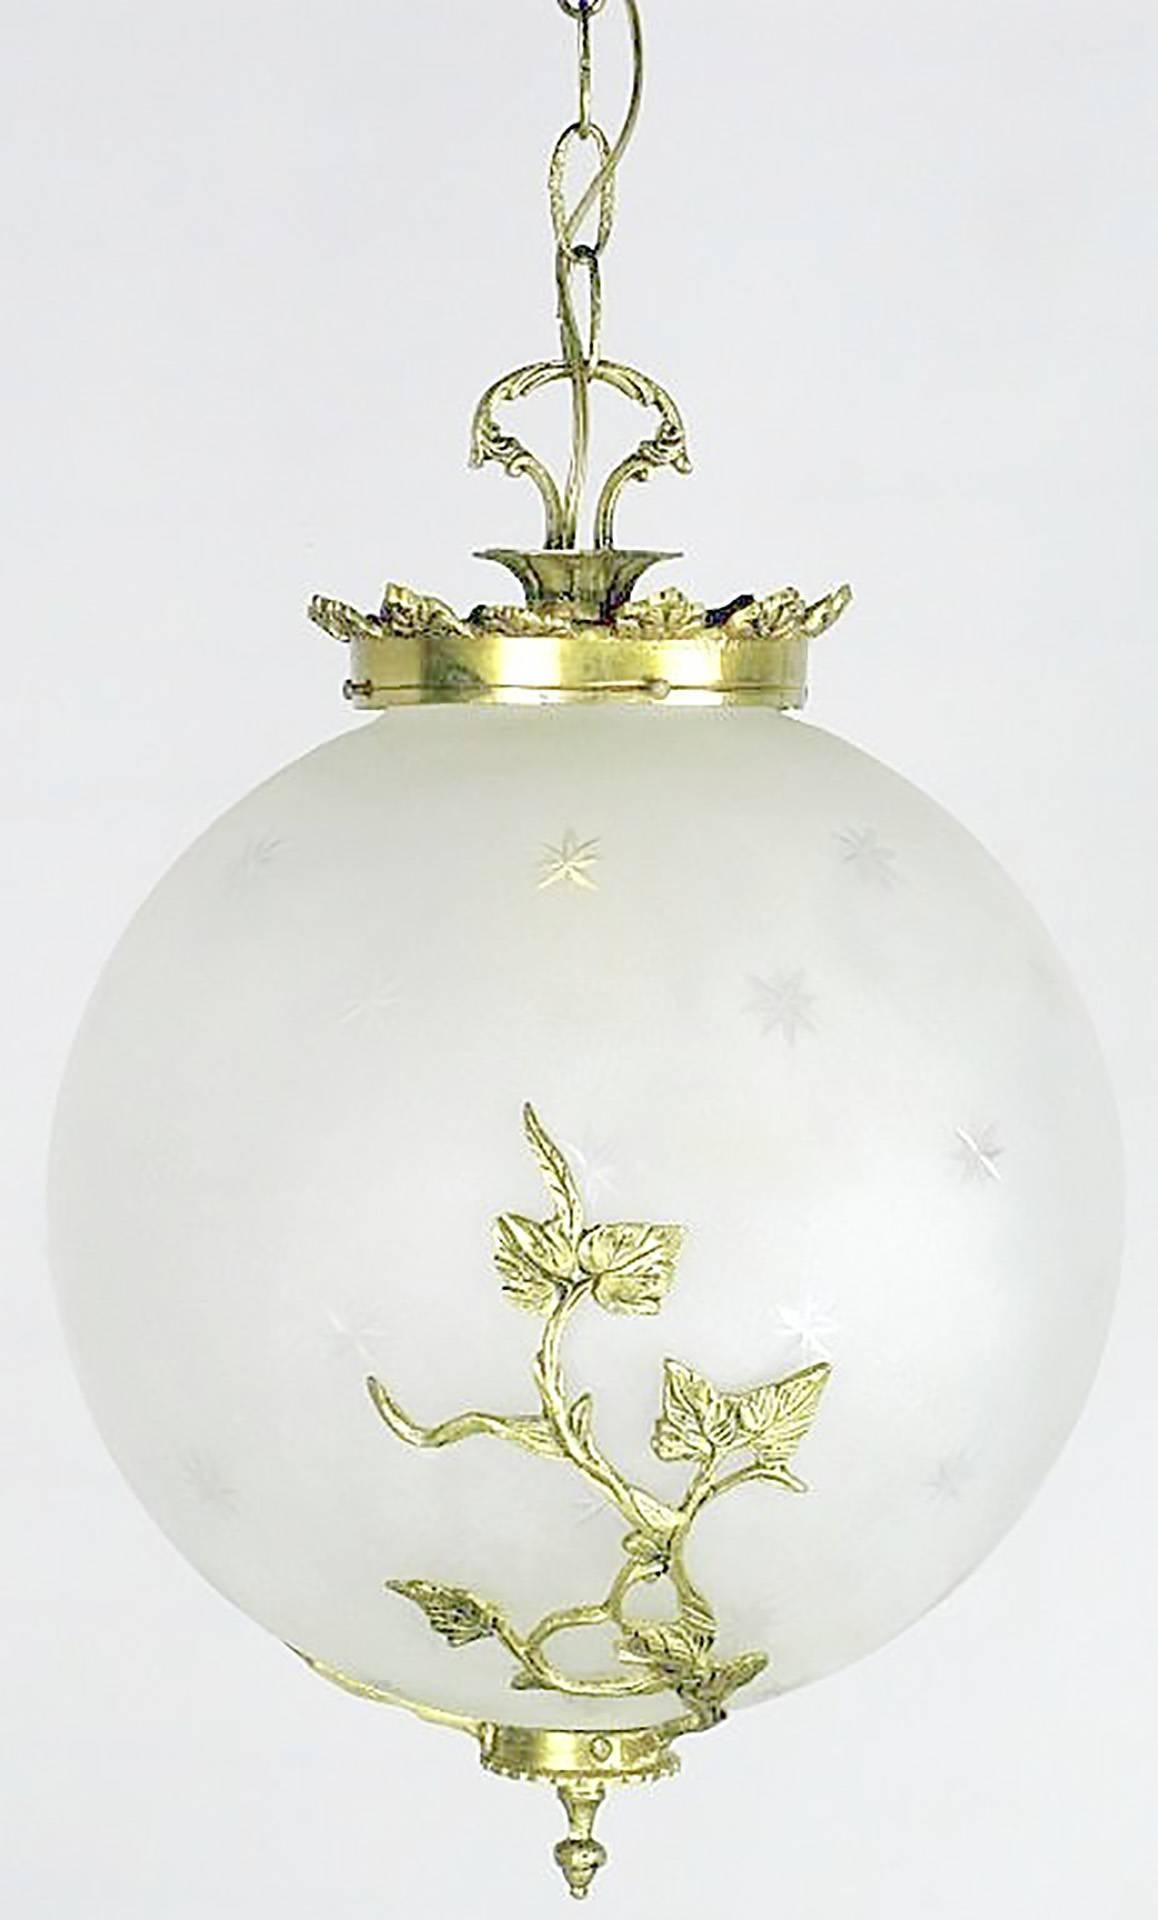 Alluring etched and frosted glass pendant with stars cut into the surface. Solid brass foliate details hug the lower hemisphere. Illuminated by a single internal bulb. Versatile pendant light that would function well as a petite chandelier over a